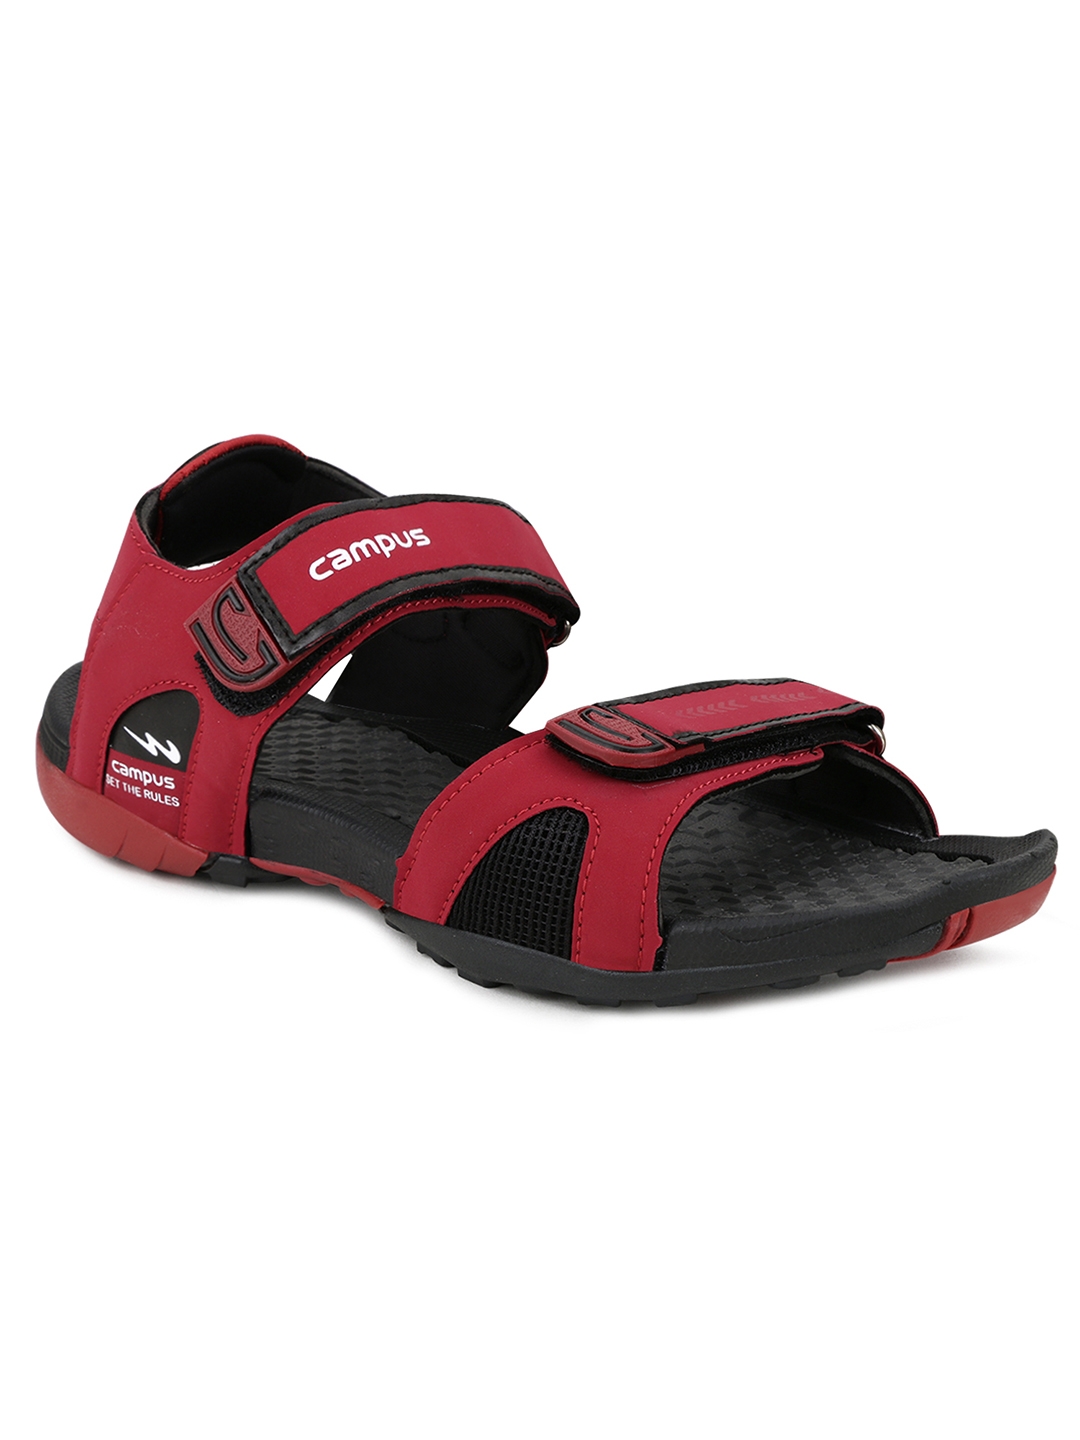 Campus Shoes | Red and Black Sandals